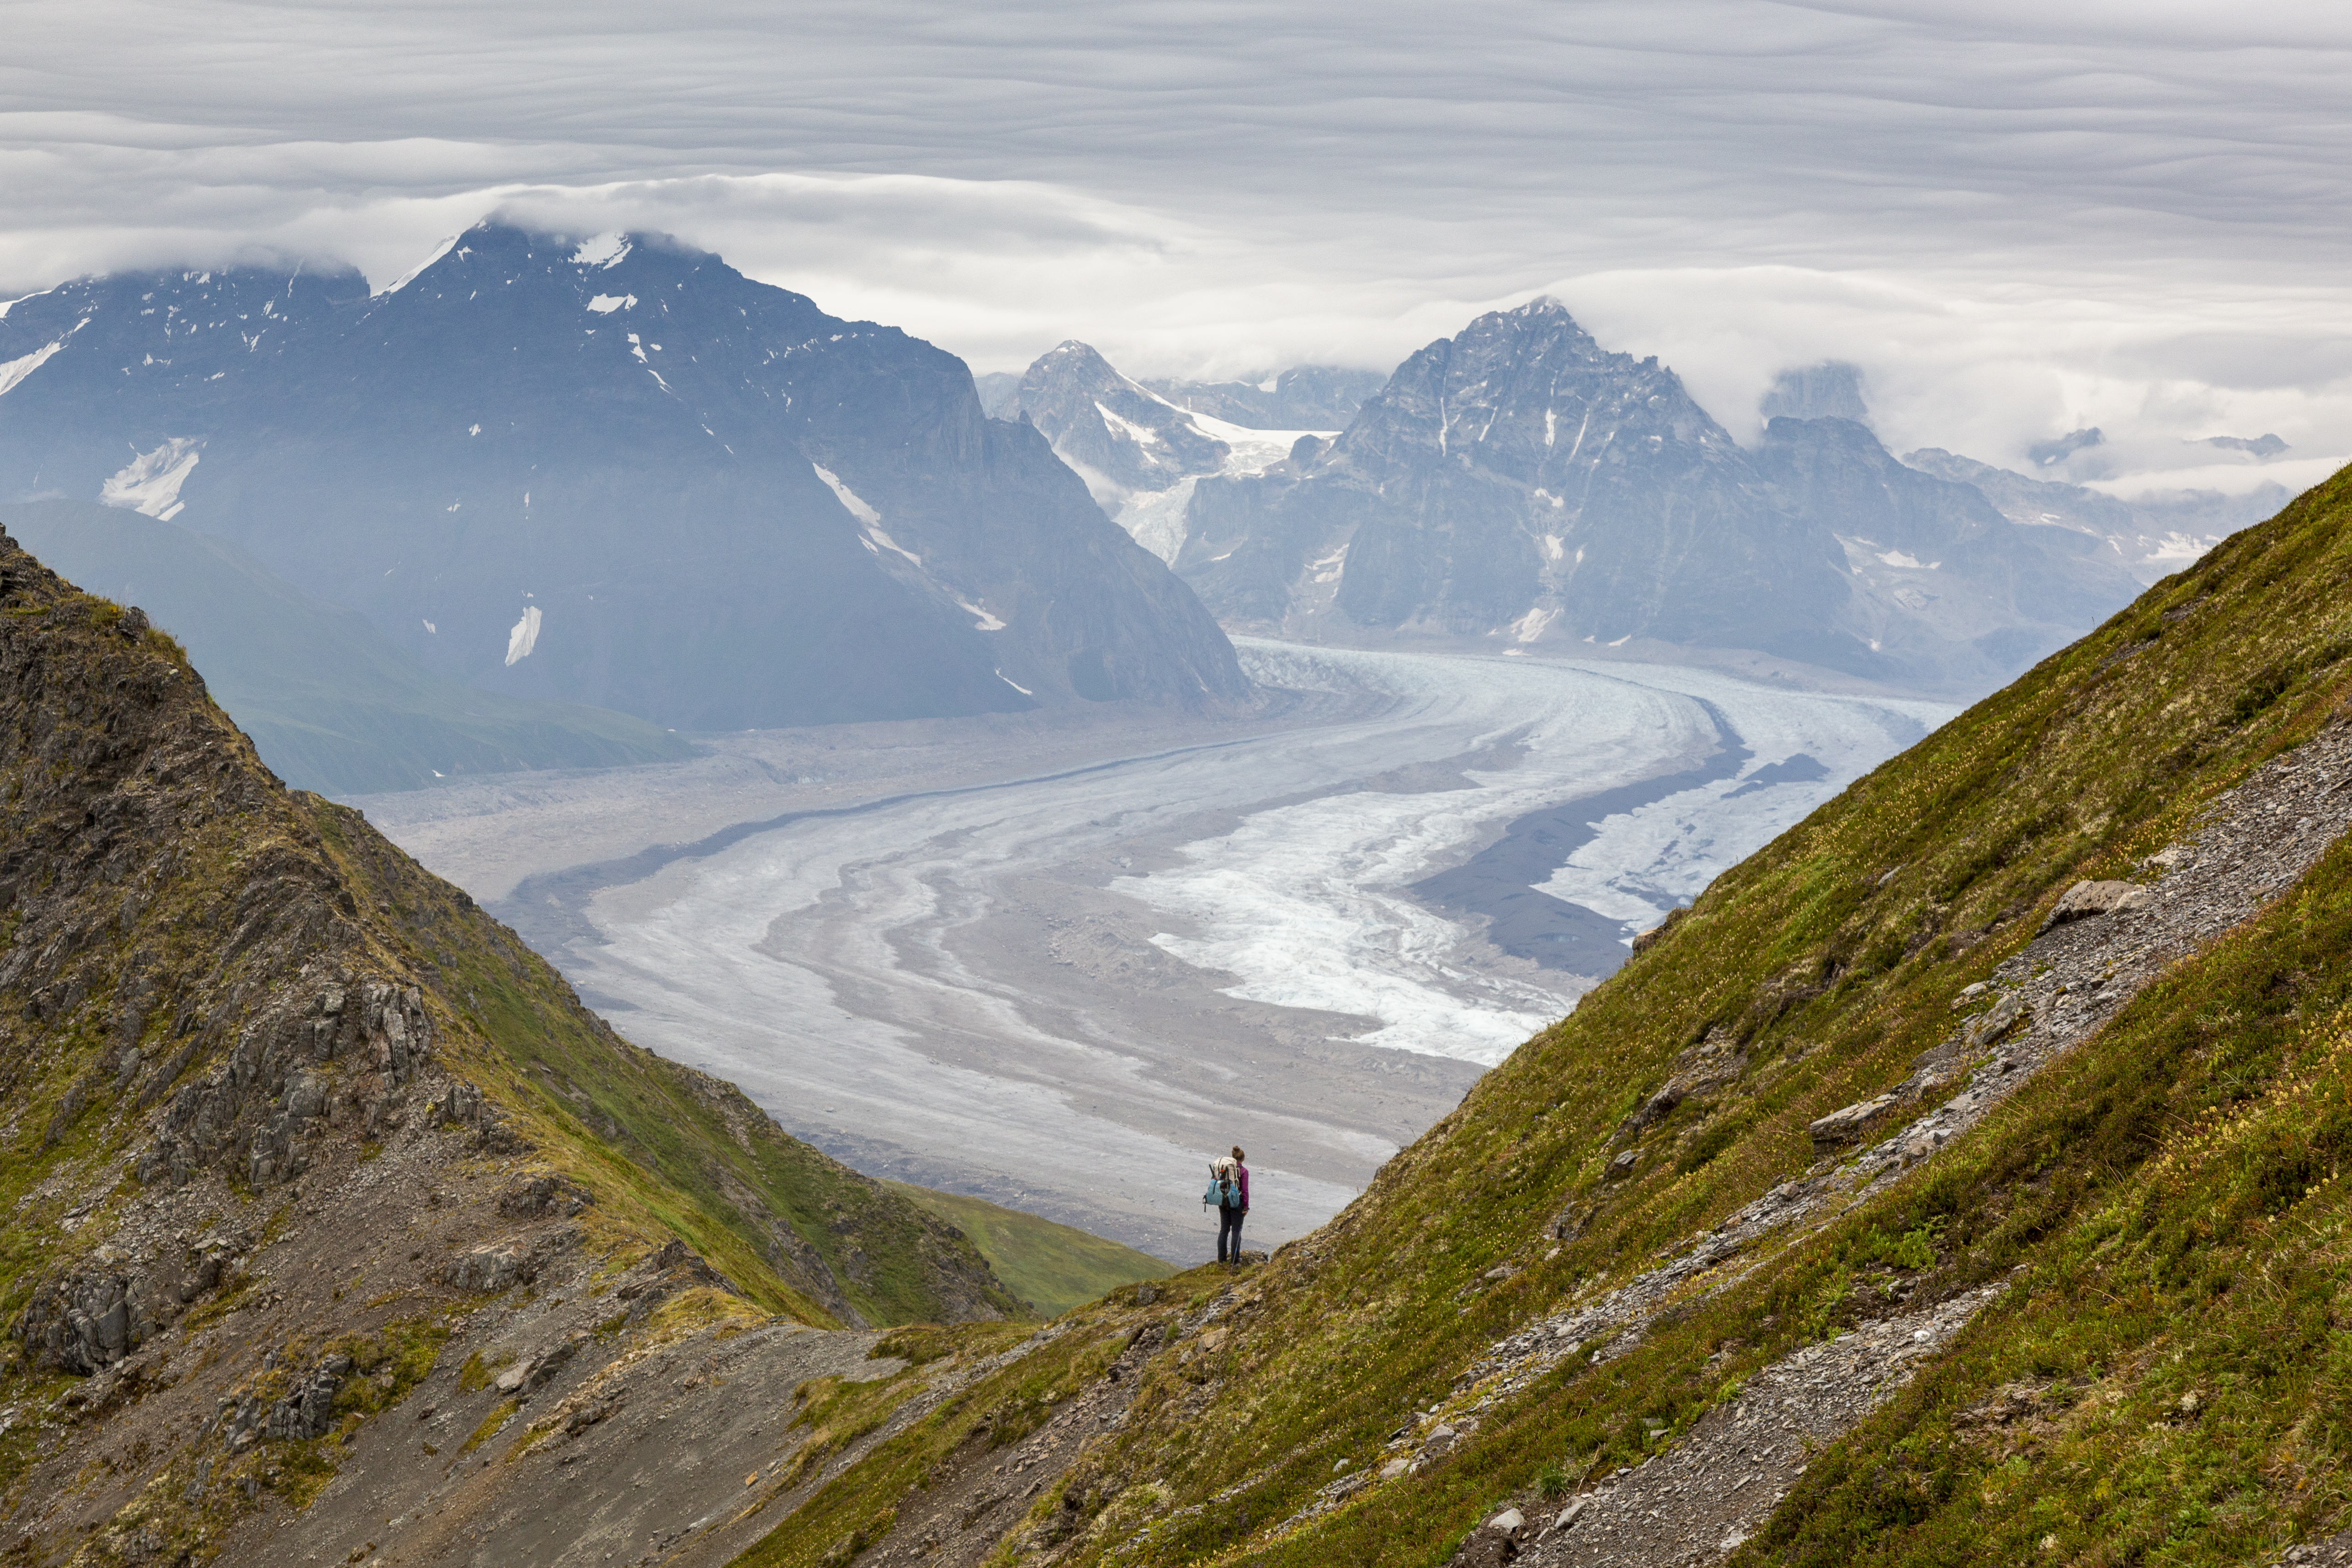 A backpacker stands on a green, rocky ridge looking up a glacier with snow-capped peaks in the distance